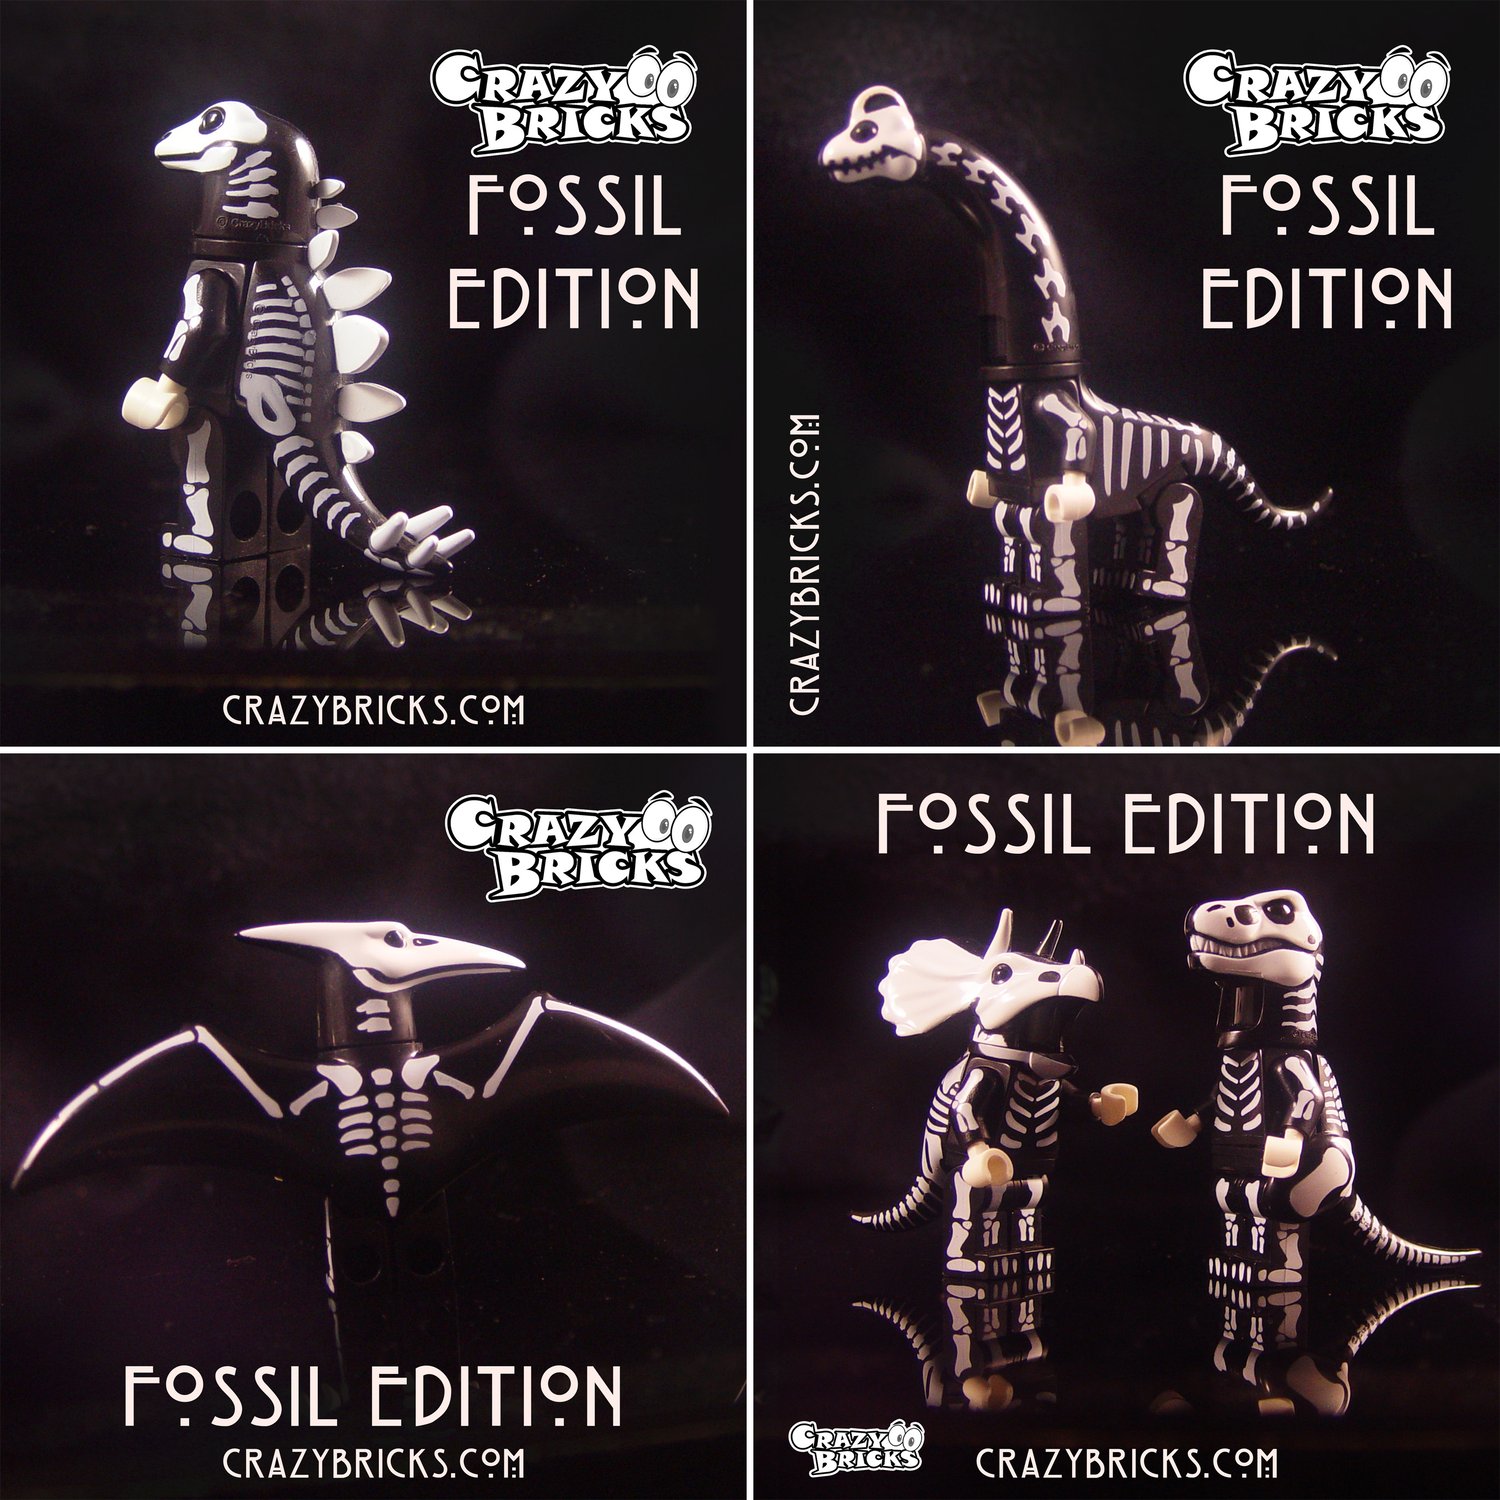 FOSSIL EDITION Dino Dudes! Limited Stock!